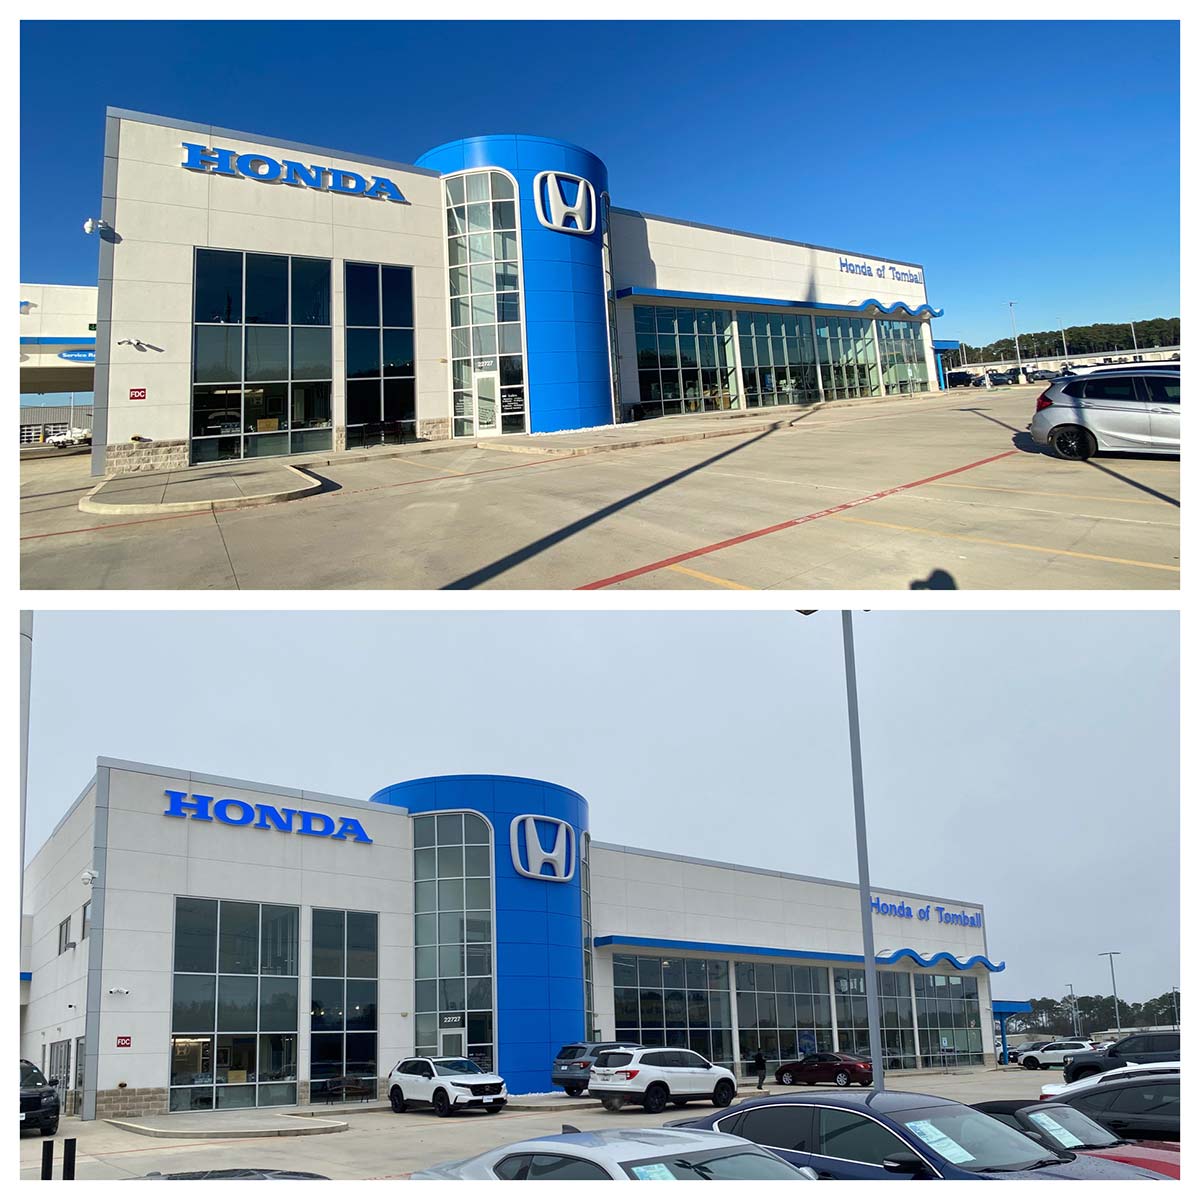 Commercial Pressure Washing - Honda Dealership in Tomball, TX